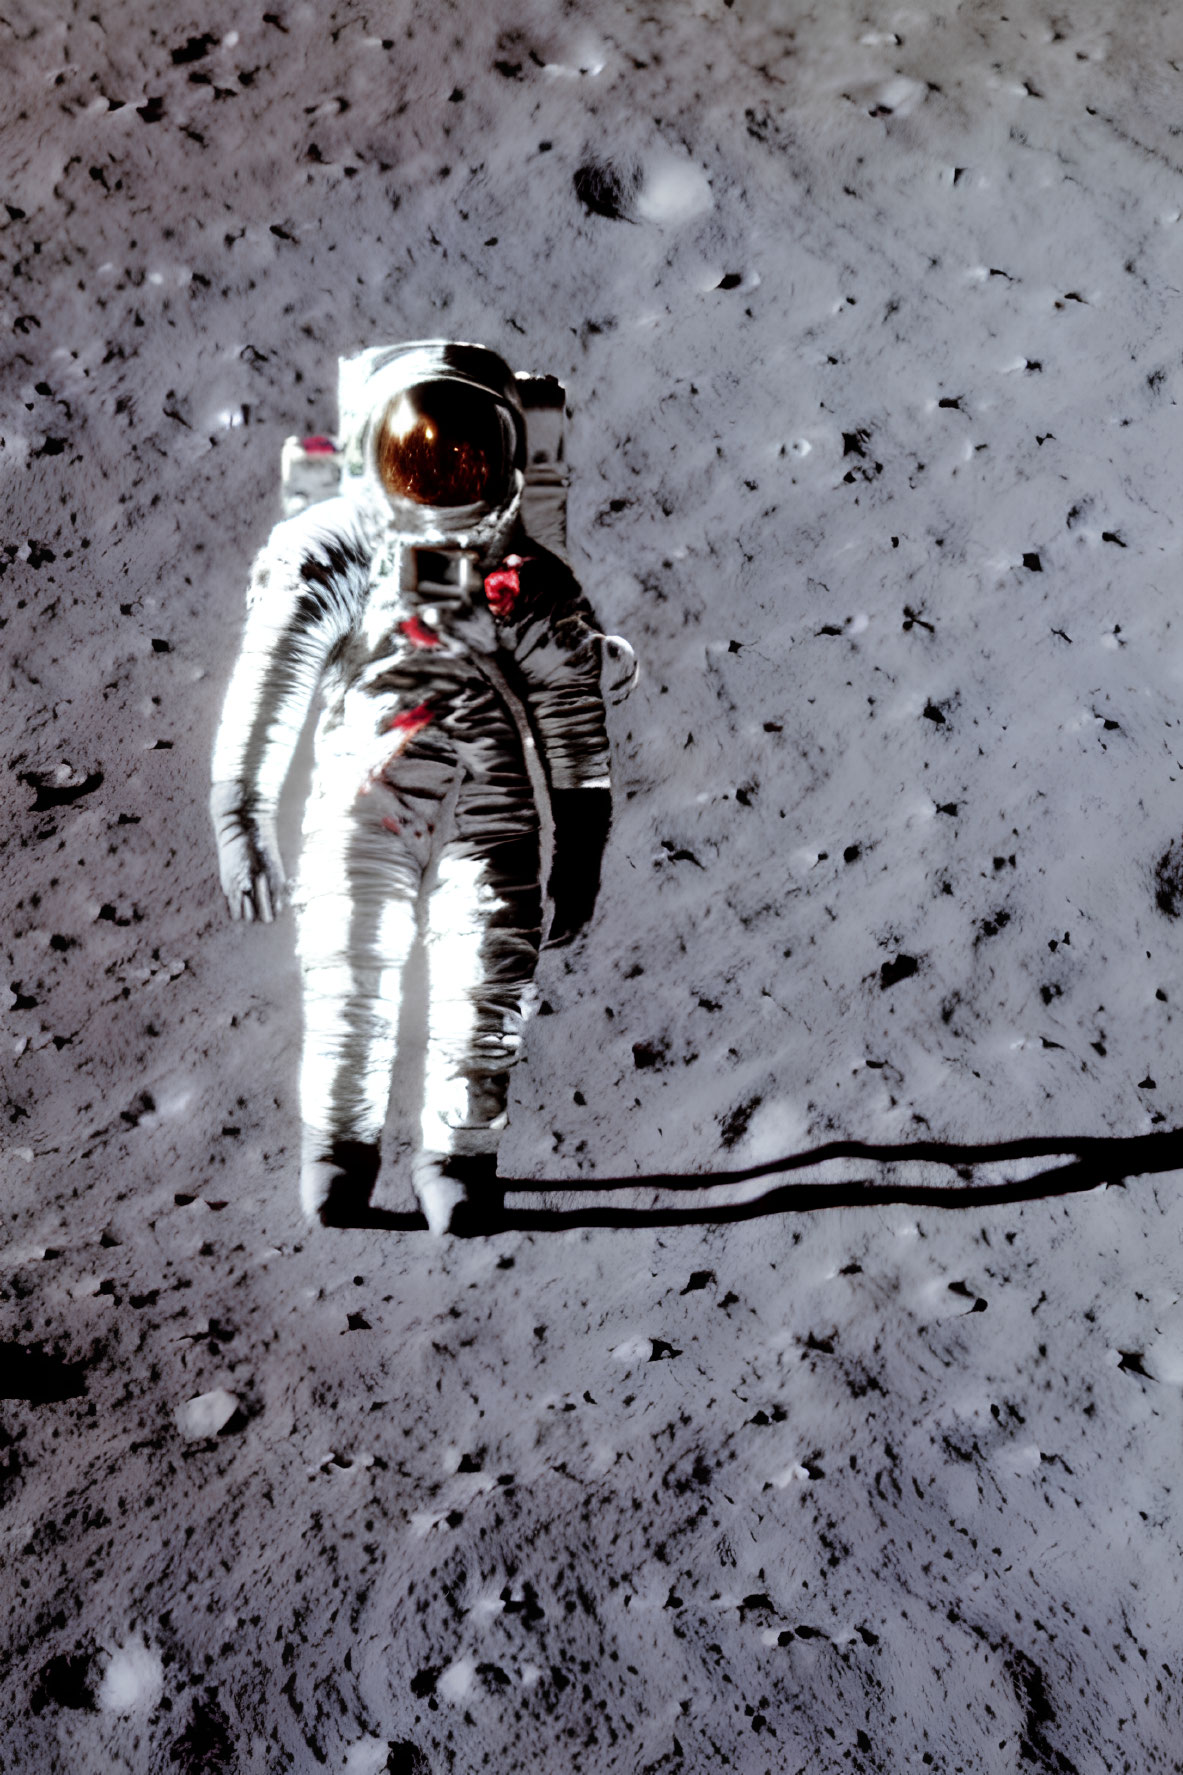 Astronaut in reflective space suit on lunar surface with Earth in background